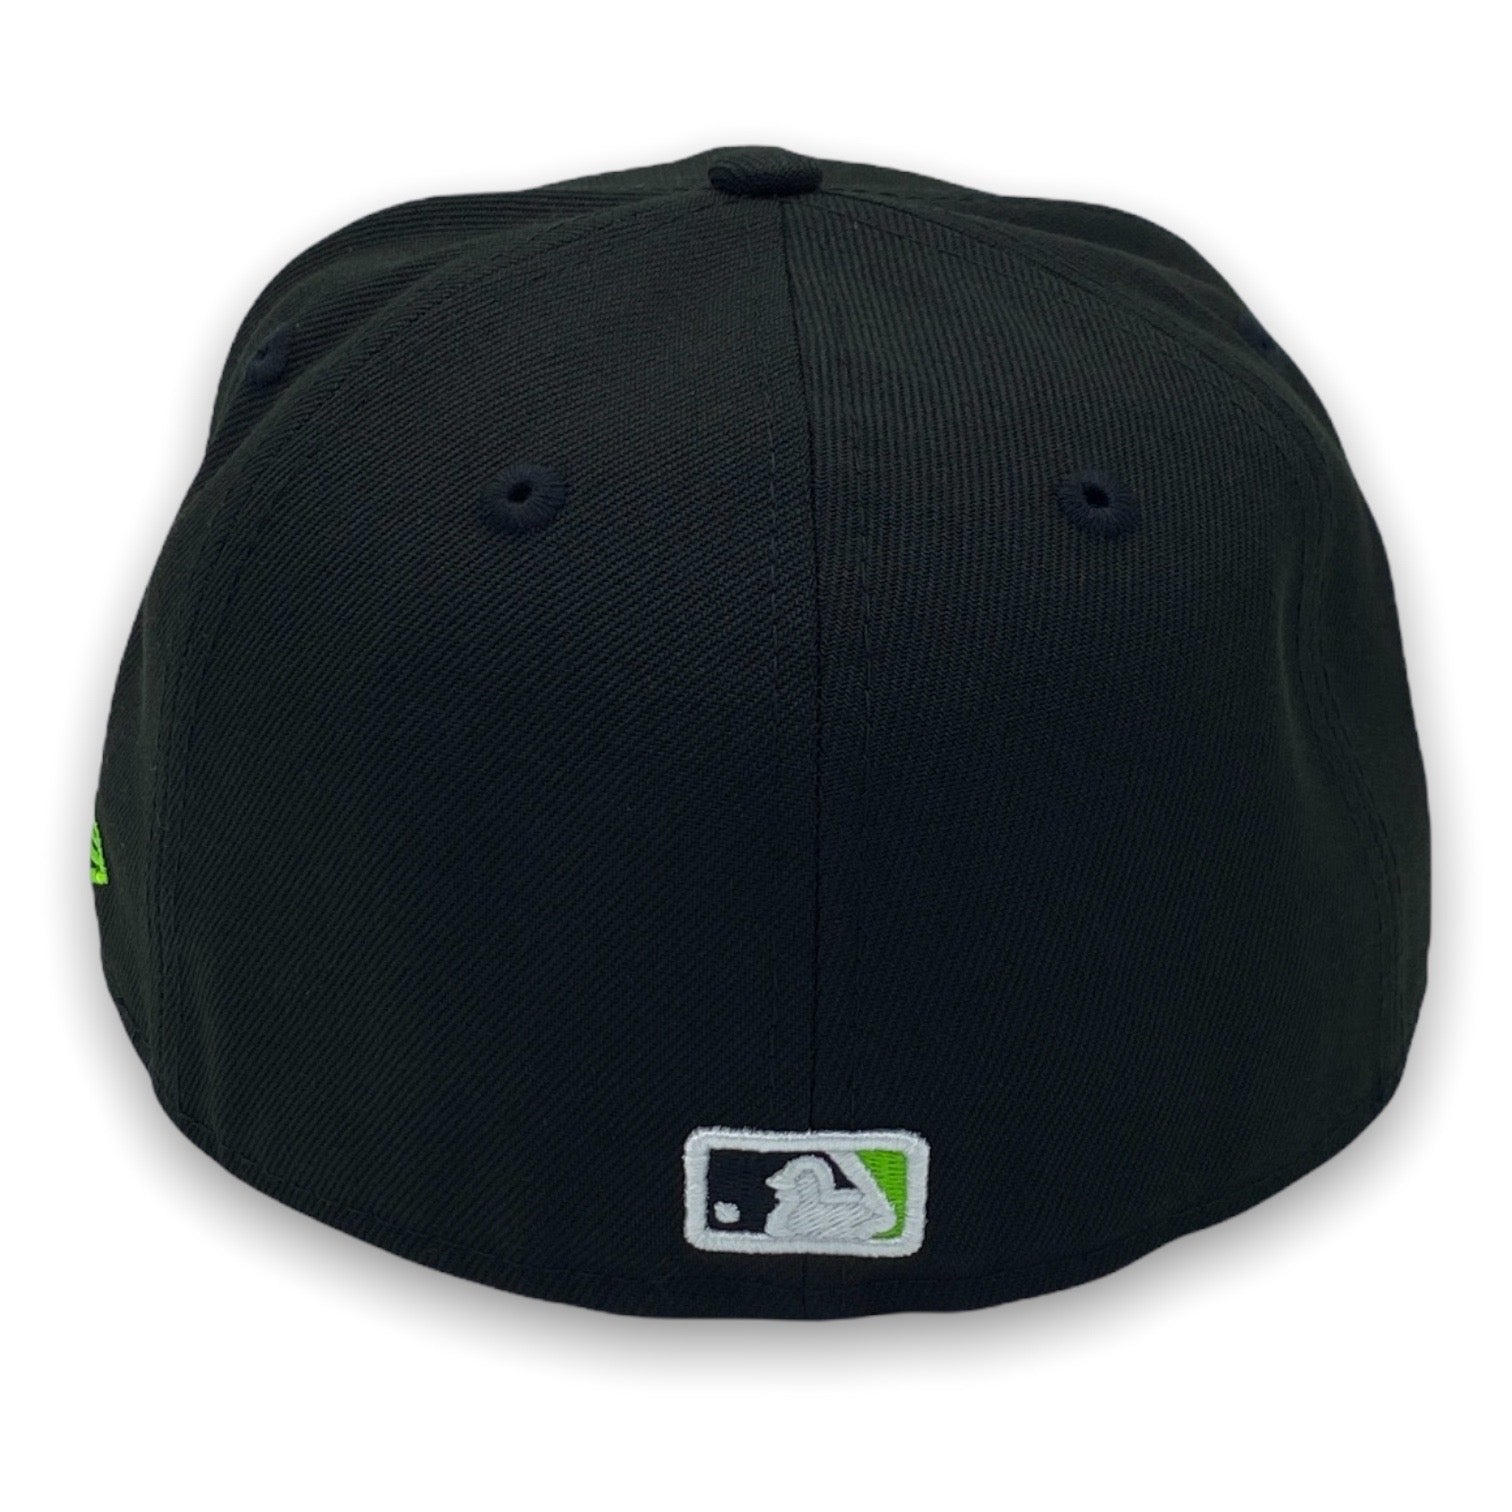 NY Yankees Basic New Era 59FIFTY Black & Neon Green Fitted Hat